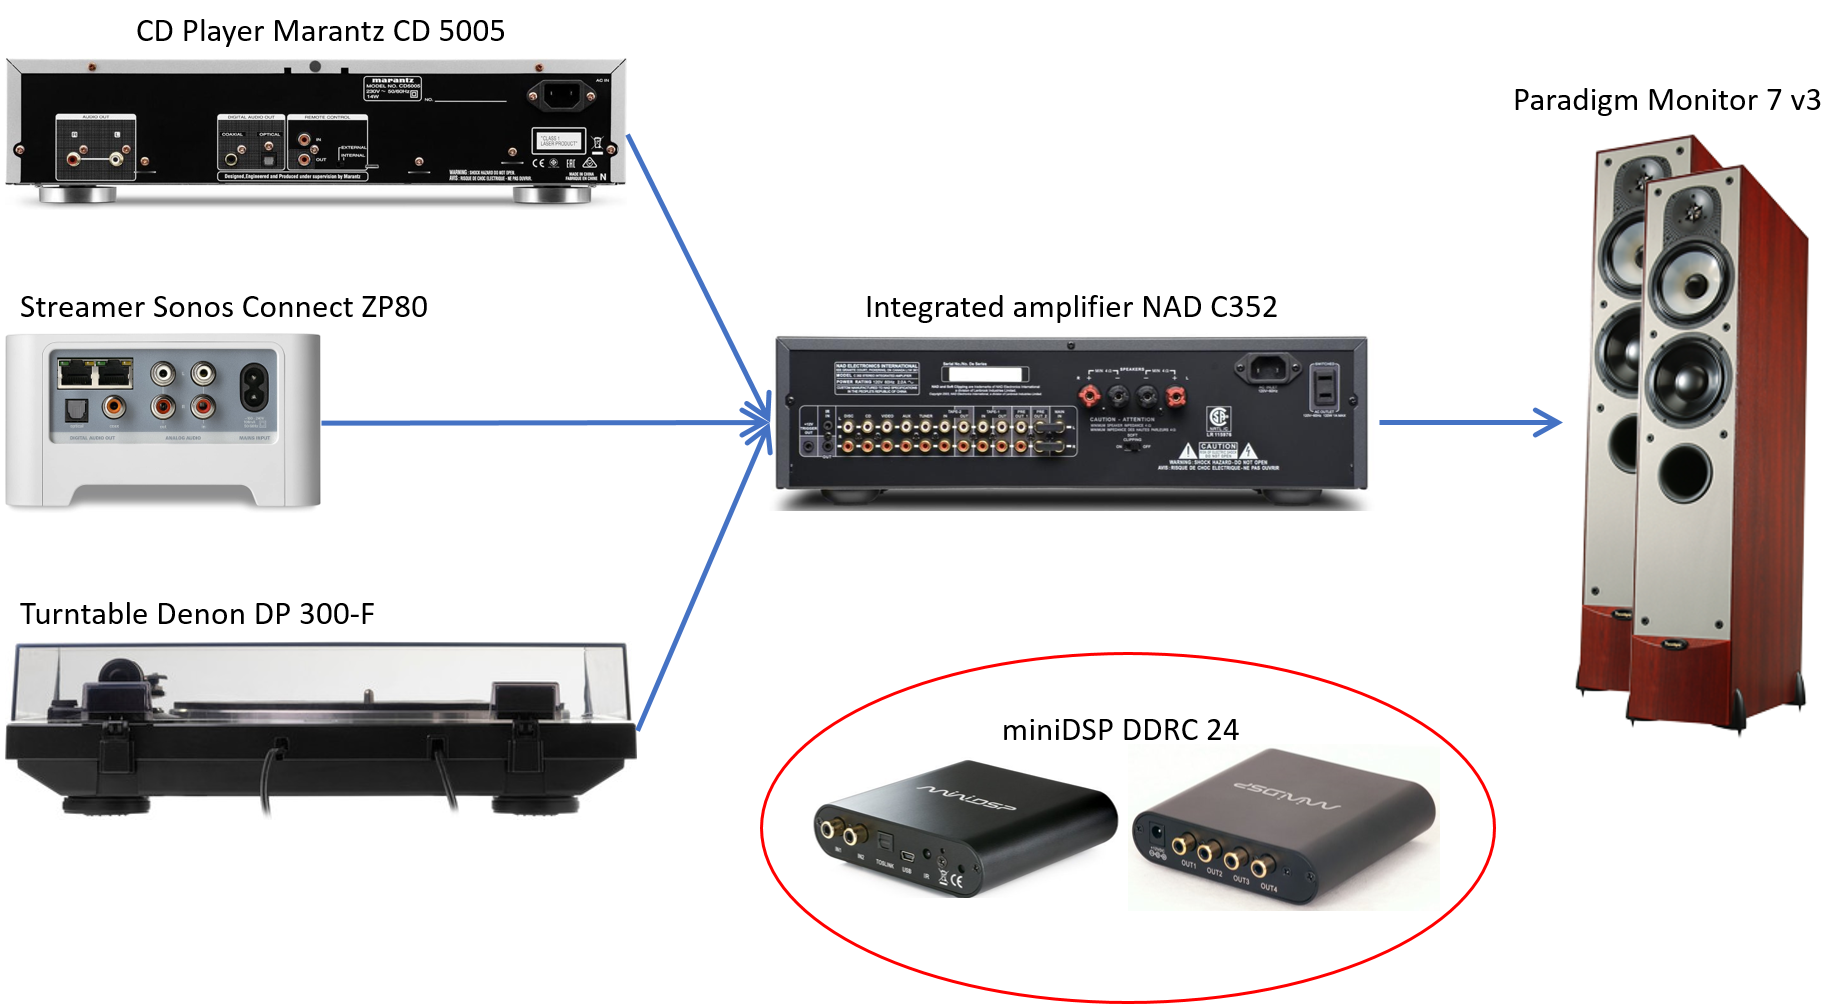 How to connect miniDSP DDRC24 to my stereo set up? | Home Theater Forum ...